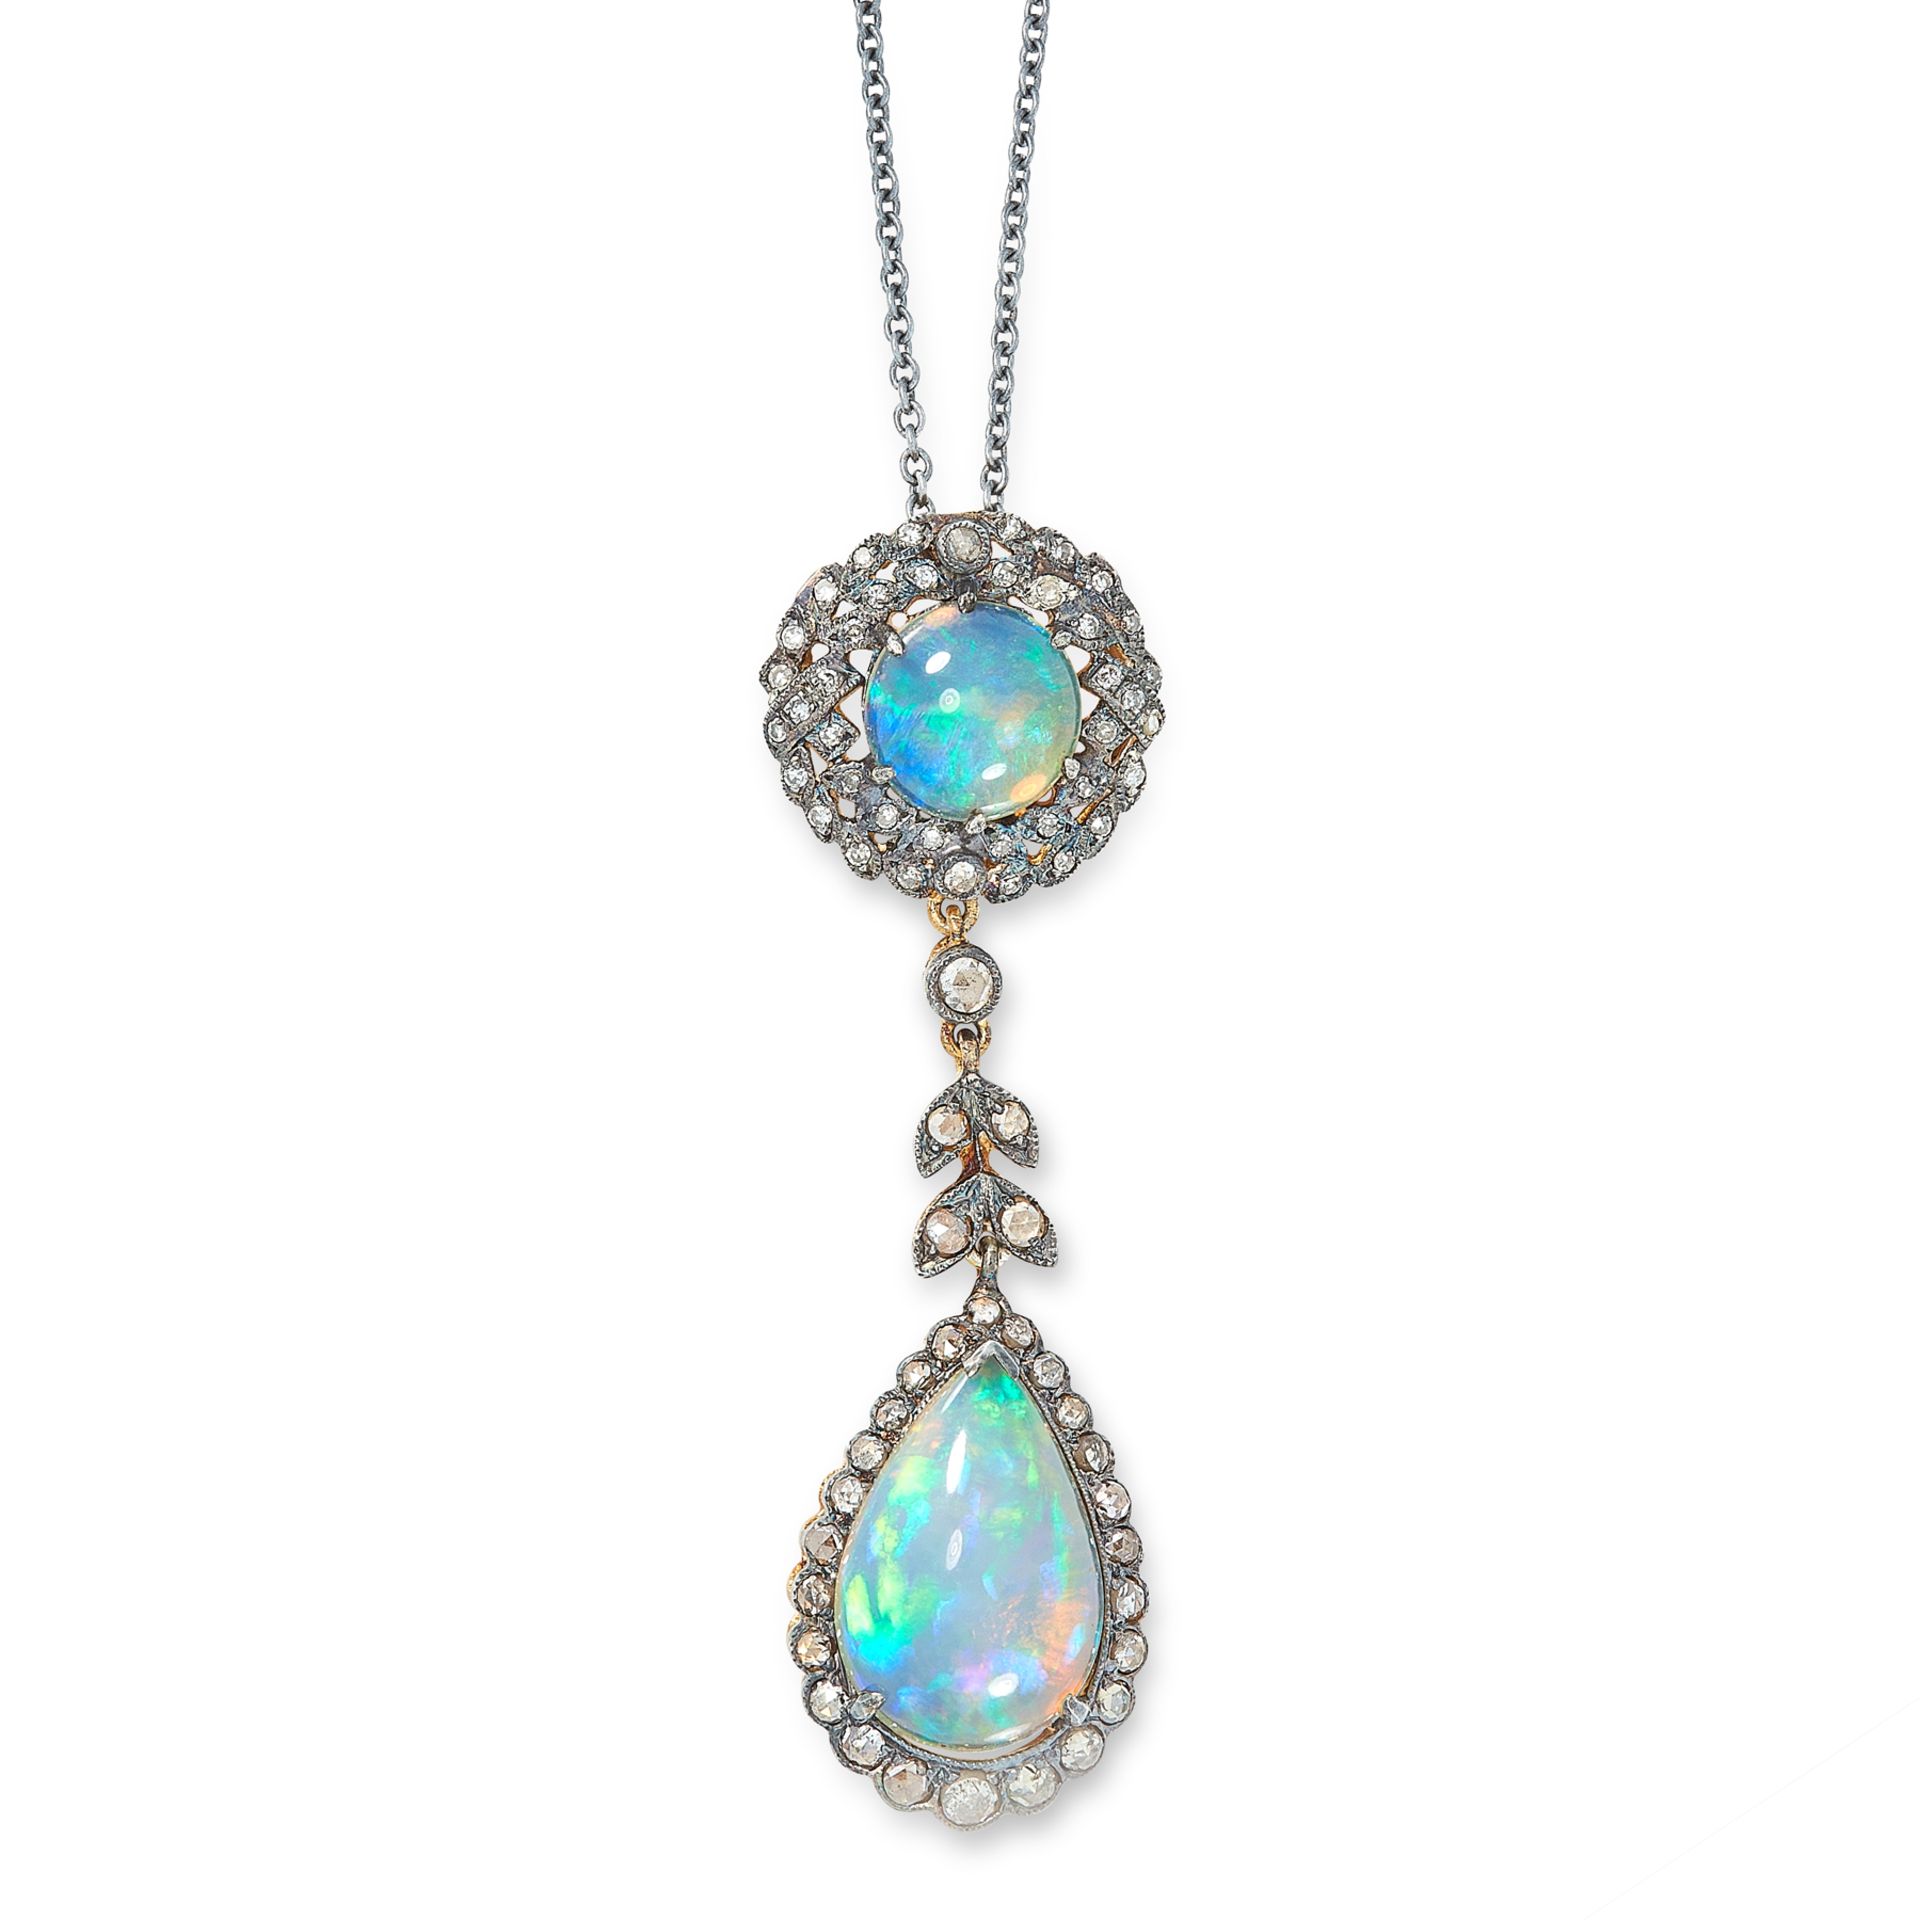 AN OPAL AND DIAMOND PENDANT AND CHAIN set with a pear shaped cabochon opal within a border of rose